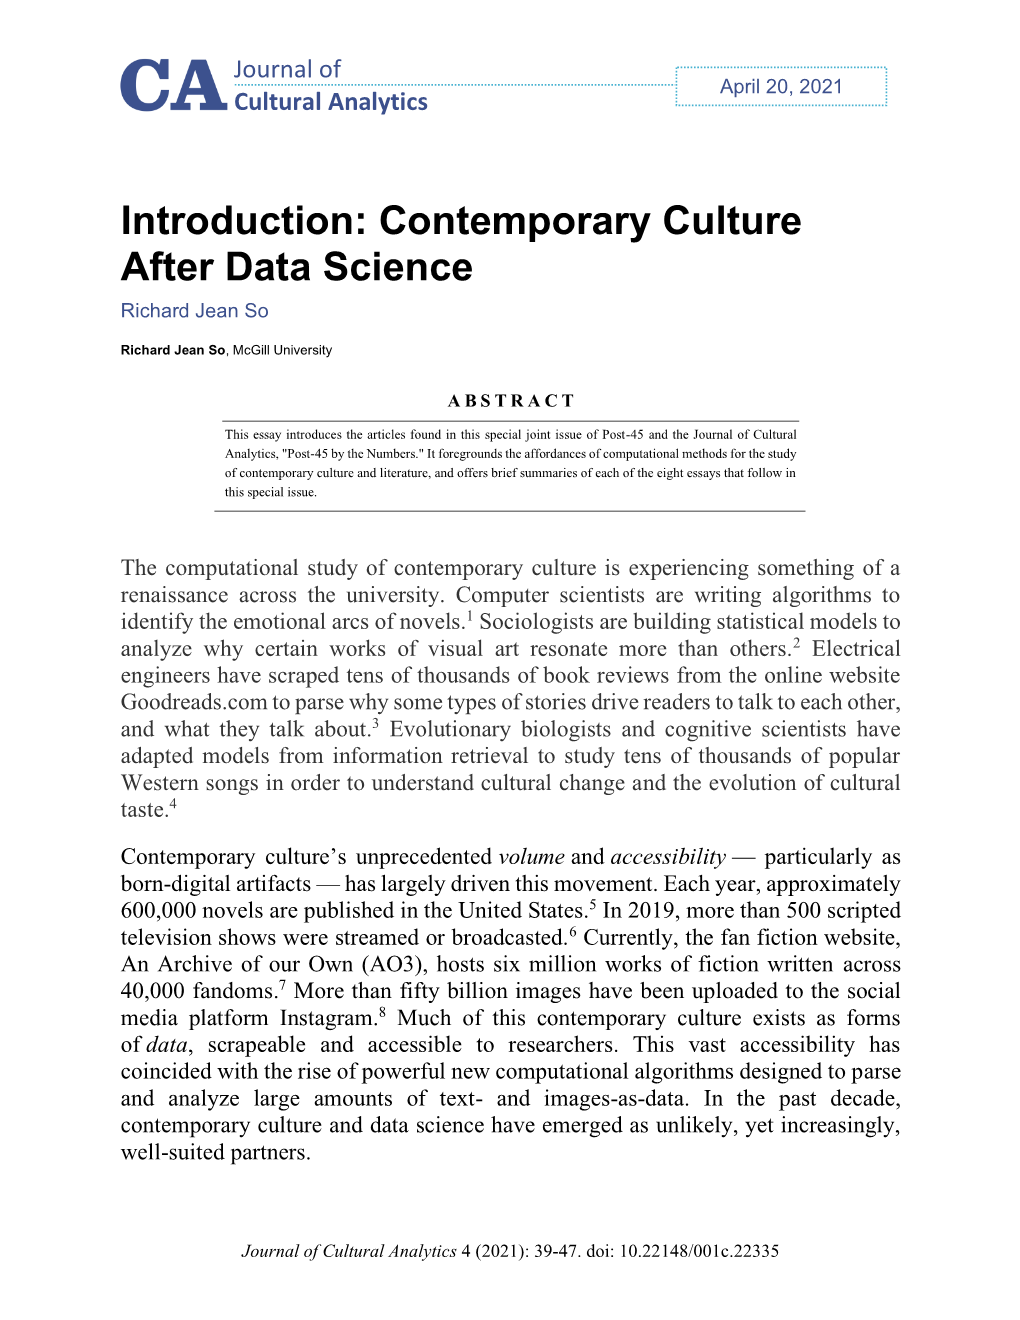 Introduction: Contemporary Culture After Data Science